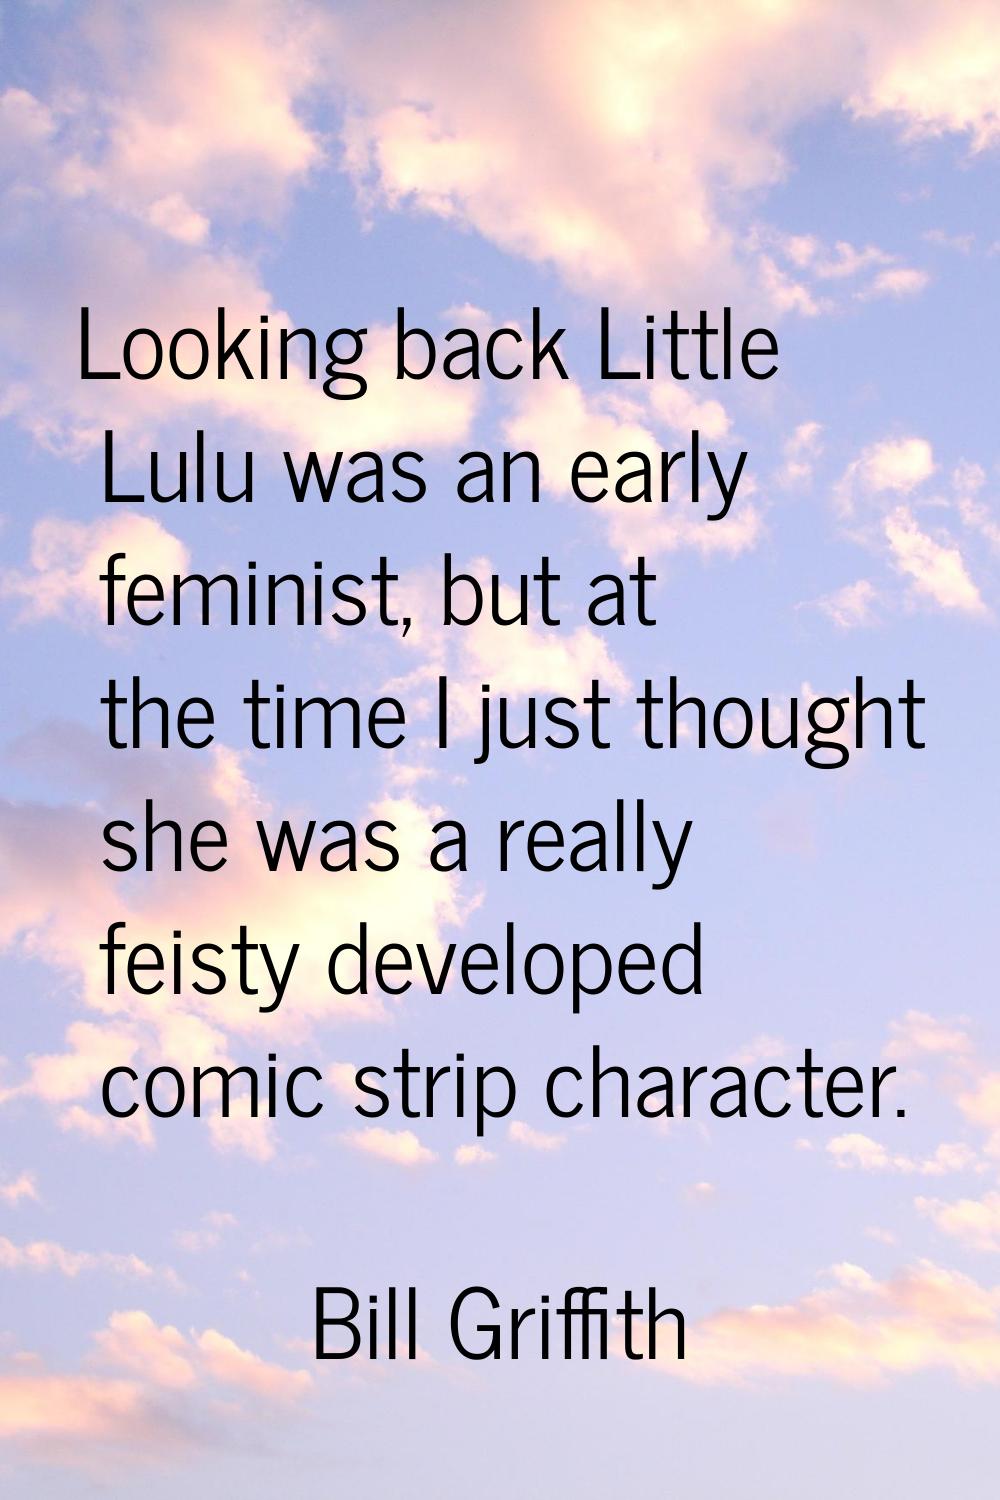 Looking back Little Lulu was an early feminist, but at the time I just thought she was a really fei